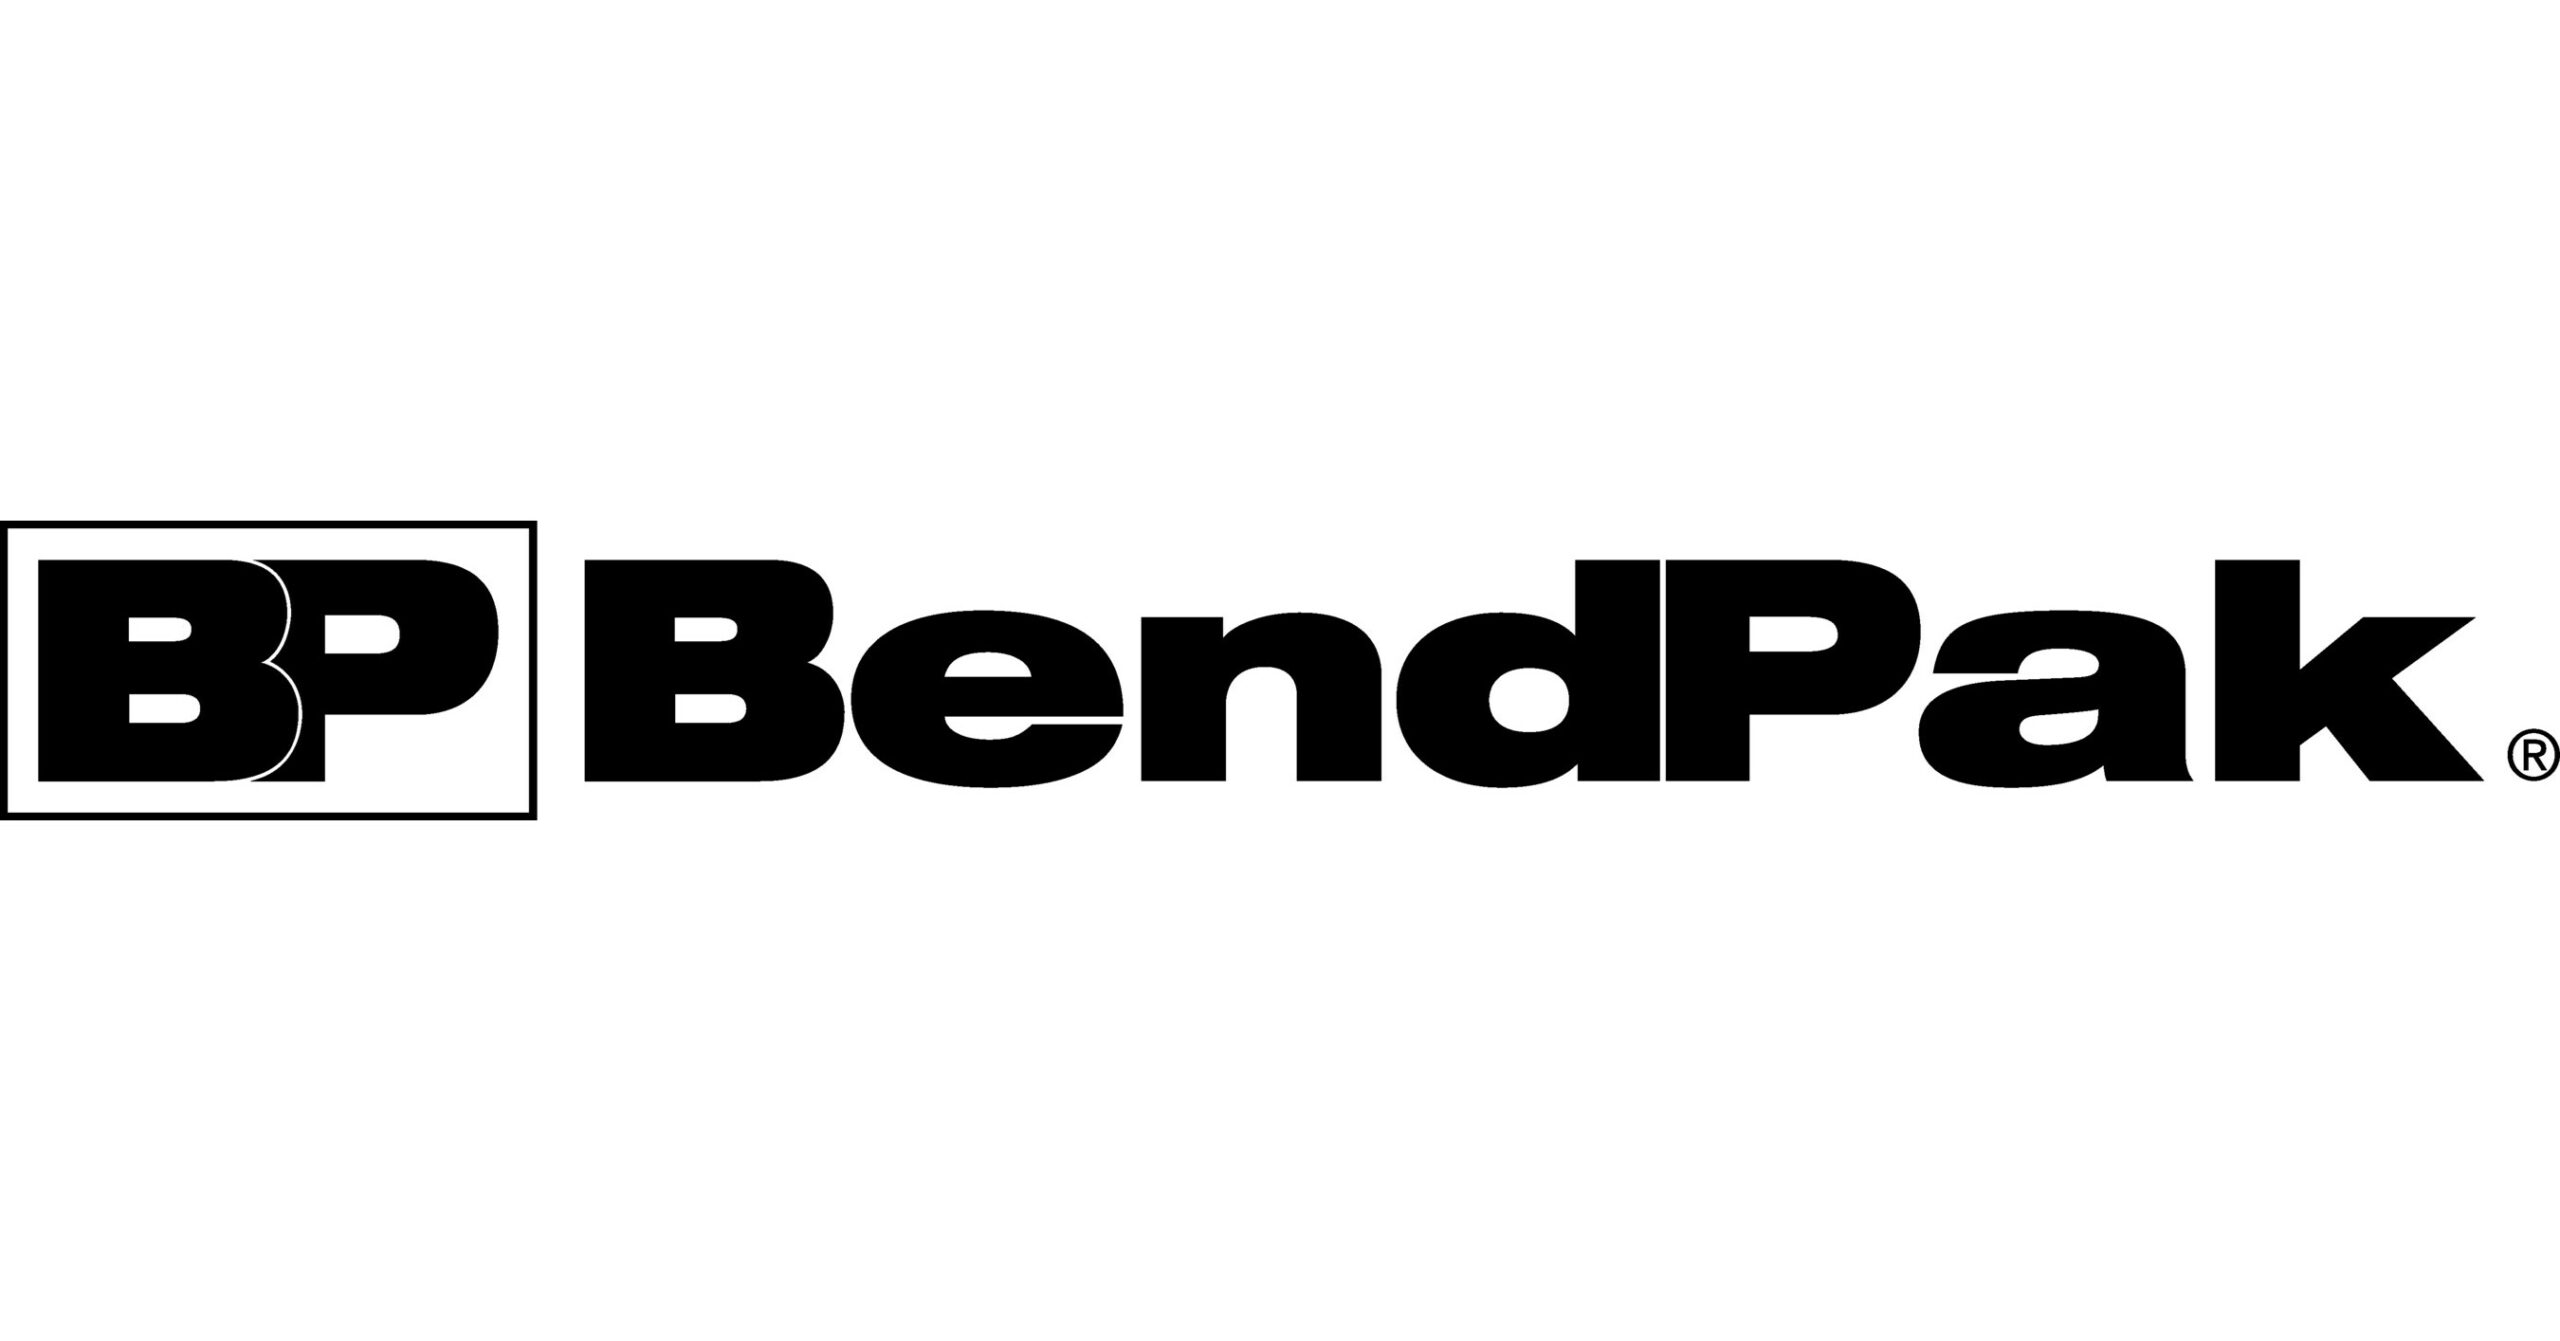 BendPak Founder Don Henthorn Passes Away | THE SHOP